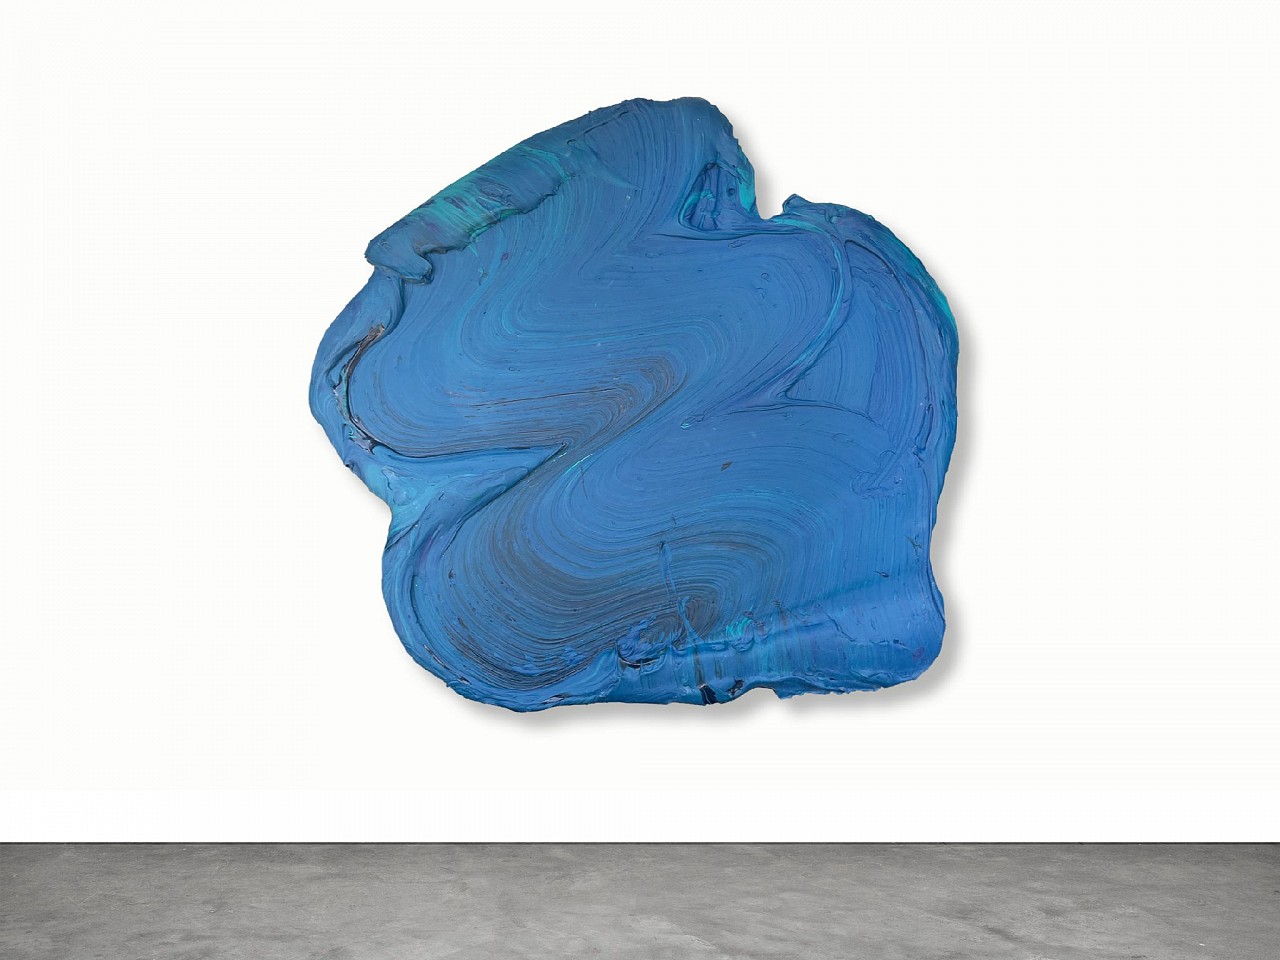 Donald Martiny, Saponi, ca. 2017
polymer and pigment on aluminum, 47 x 46 in.
MART00125